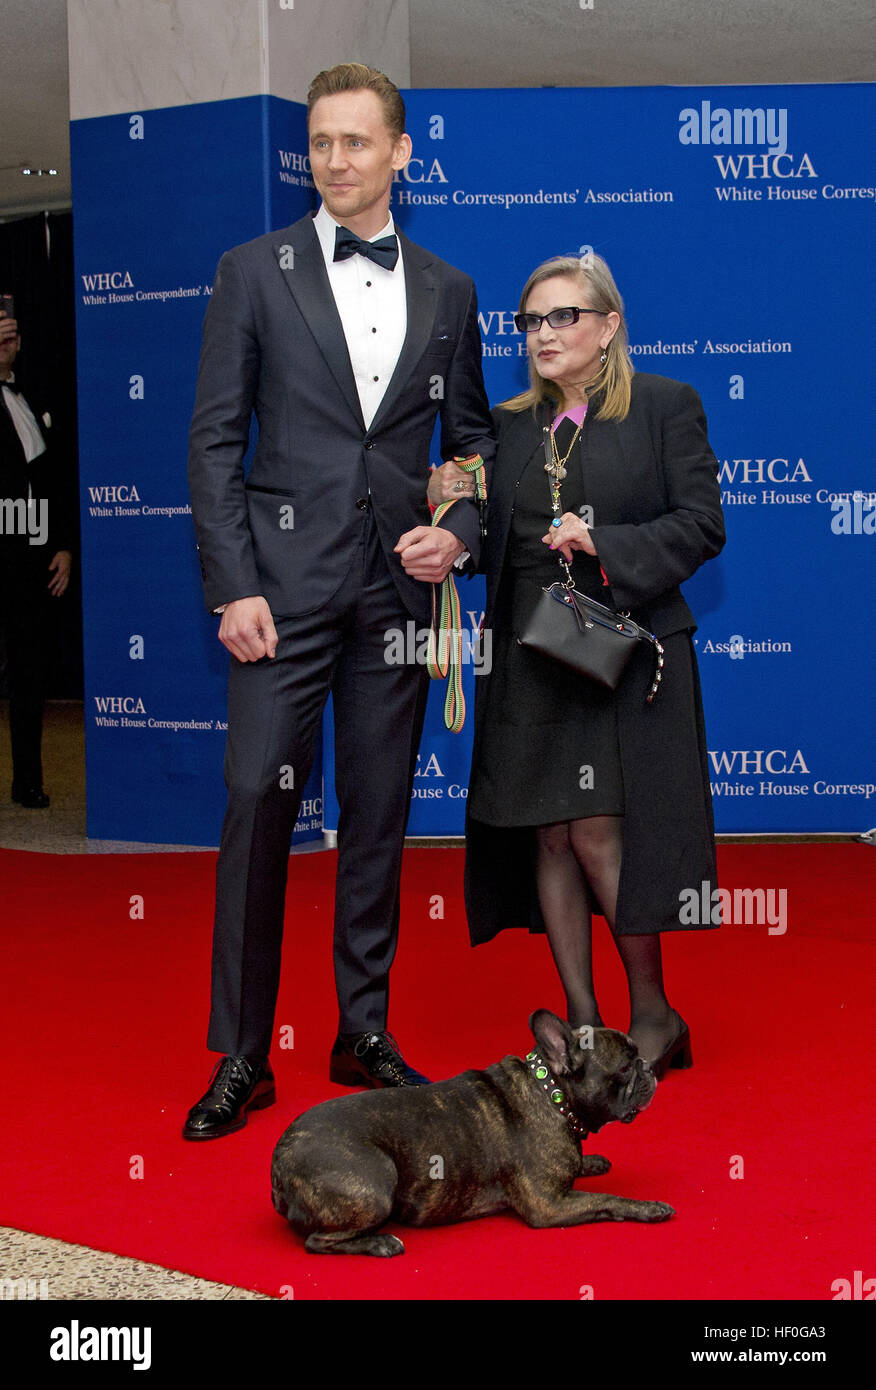 Actors Tom Hiddleston, left, and Carrie Fisher with her dog Gary arrive for the 2016 White House Correspondents Association Annual Dinner at the Washington Hilton Hotel on Saturday, April 30, 2016. Credit: Ron Sachs / CNP (RESTRICTION: NO New York or New Jersey Newspapers or newspapers within a 75 mile radius of New York City) - NO WIRE SERVICE - | usage worldwide Stock Photo